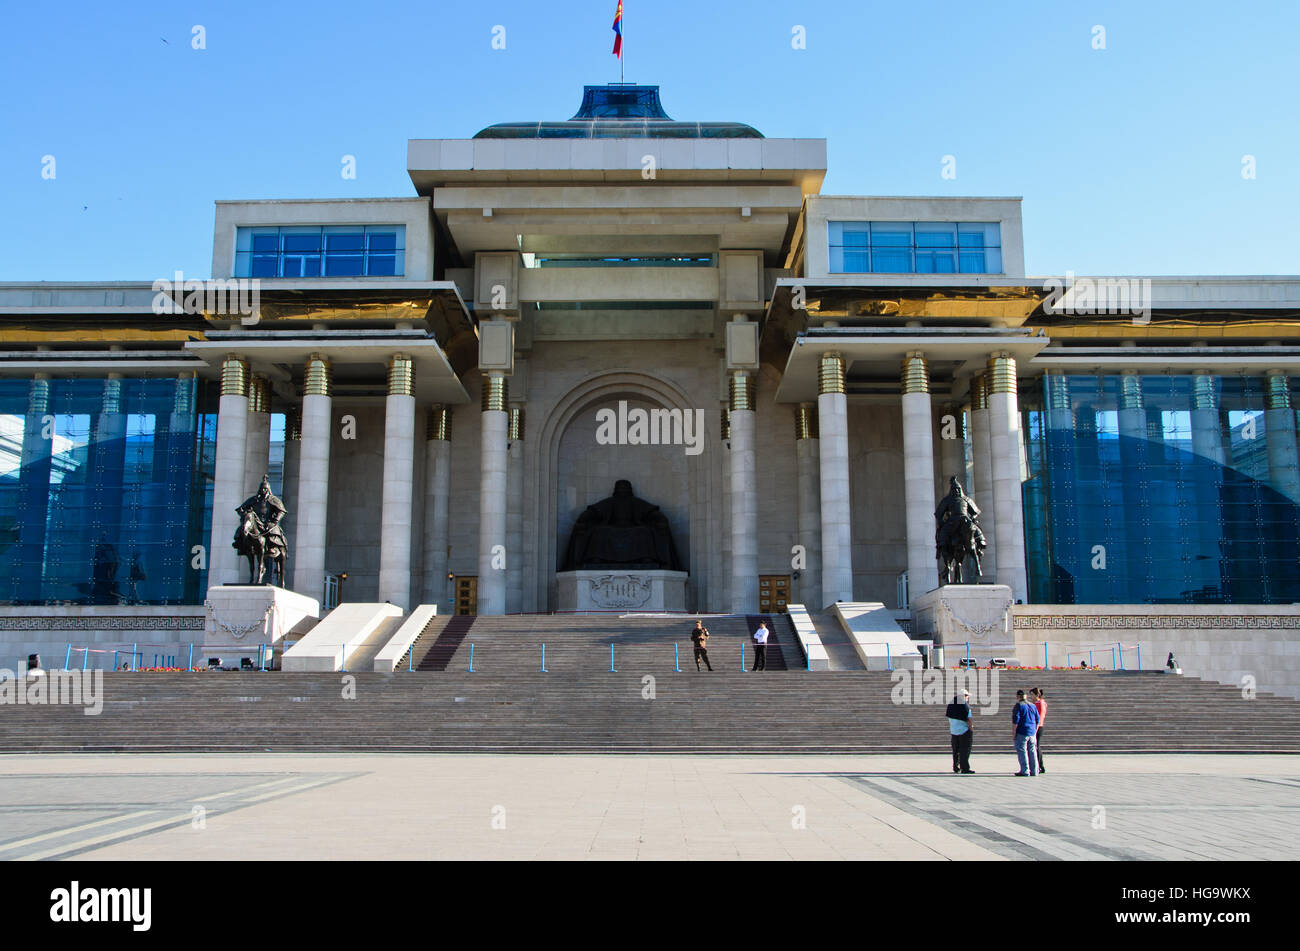 The statue of Genghis Khan and his warriors at the square. Stock Photo